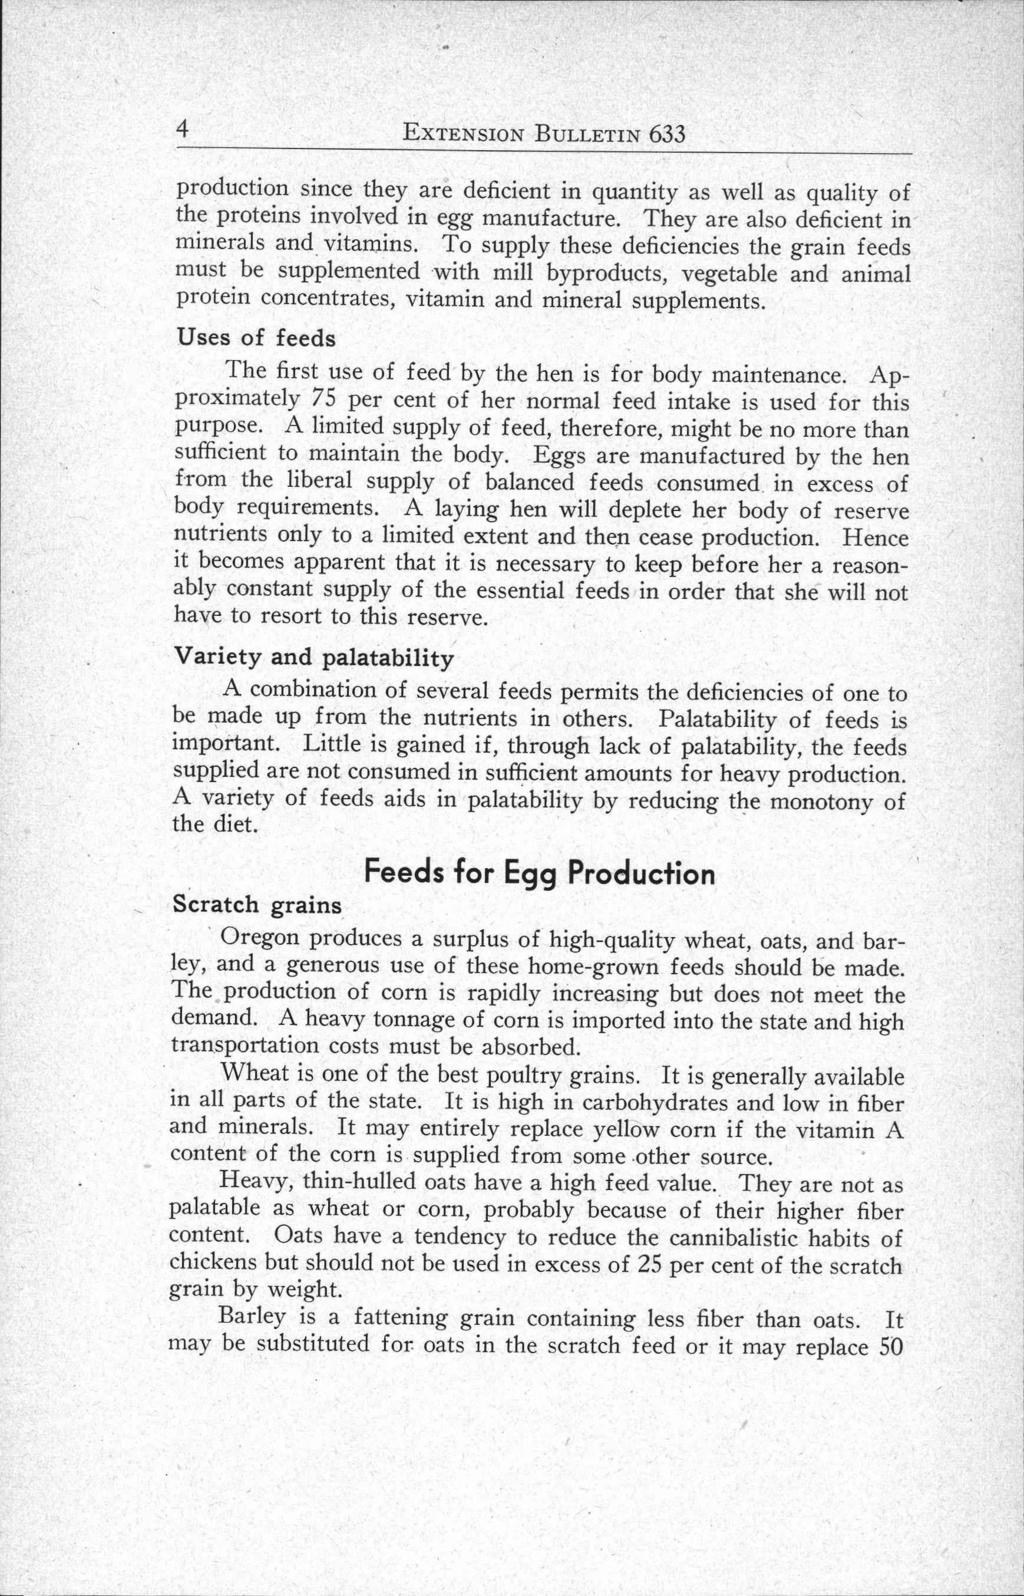 4 EXTENSION BULLETIN 633 production since they are deficient in quantity as well as quality of the proteins involved in egg manufacture. They are also deficient in minerals and vitamins.